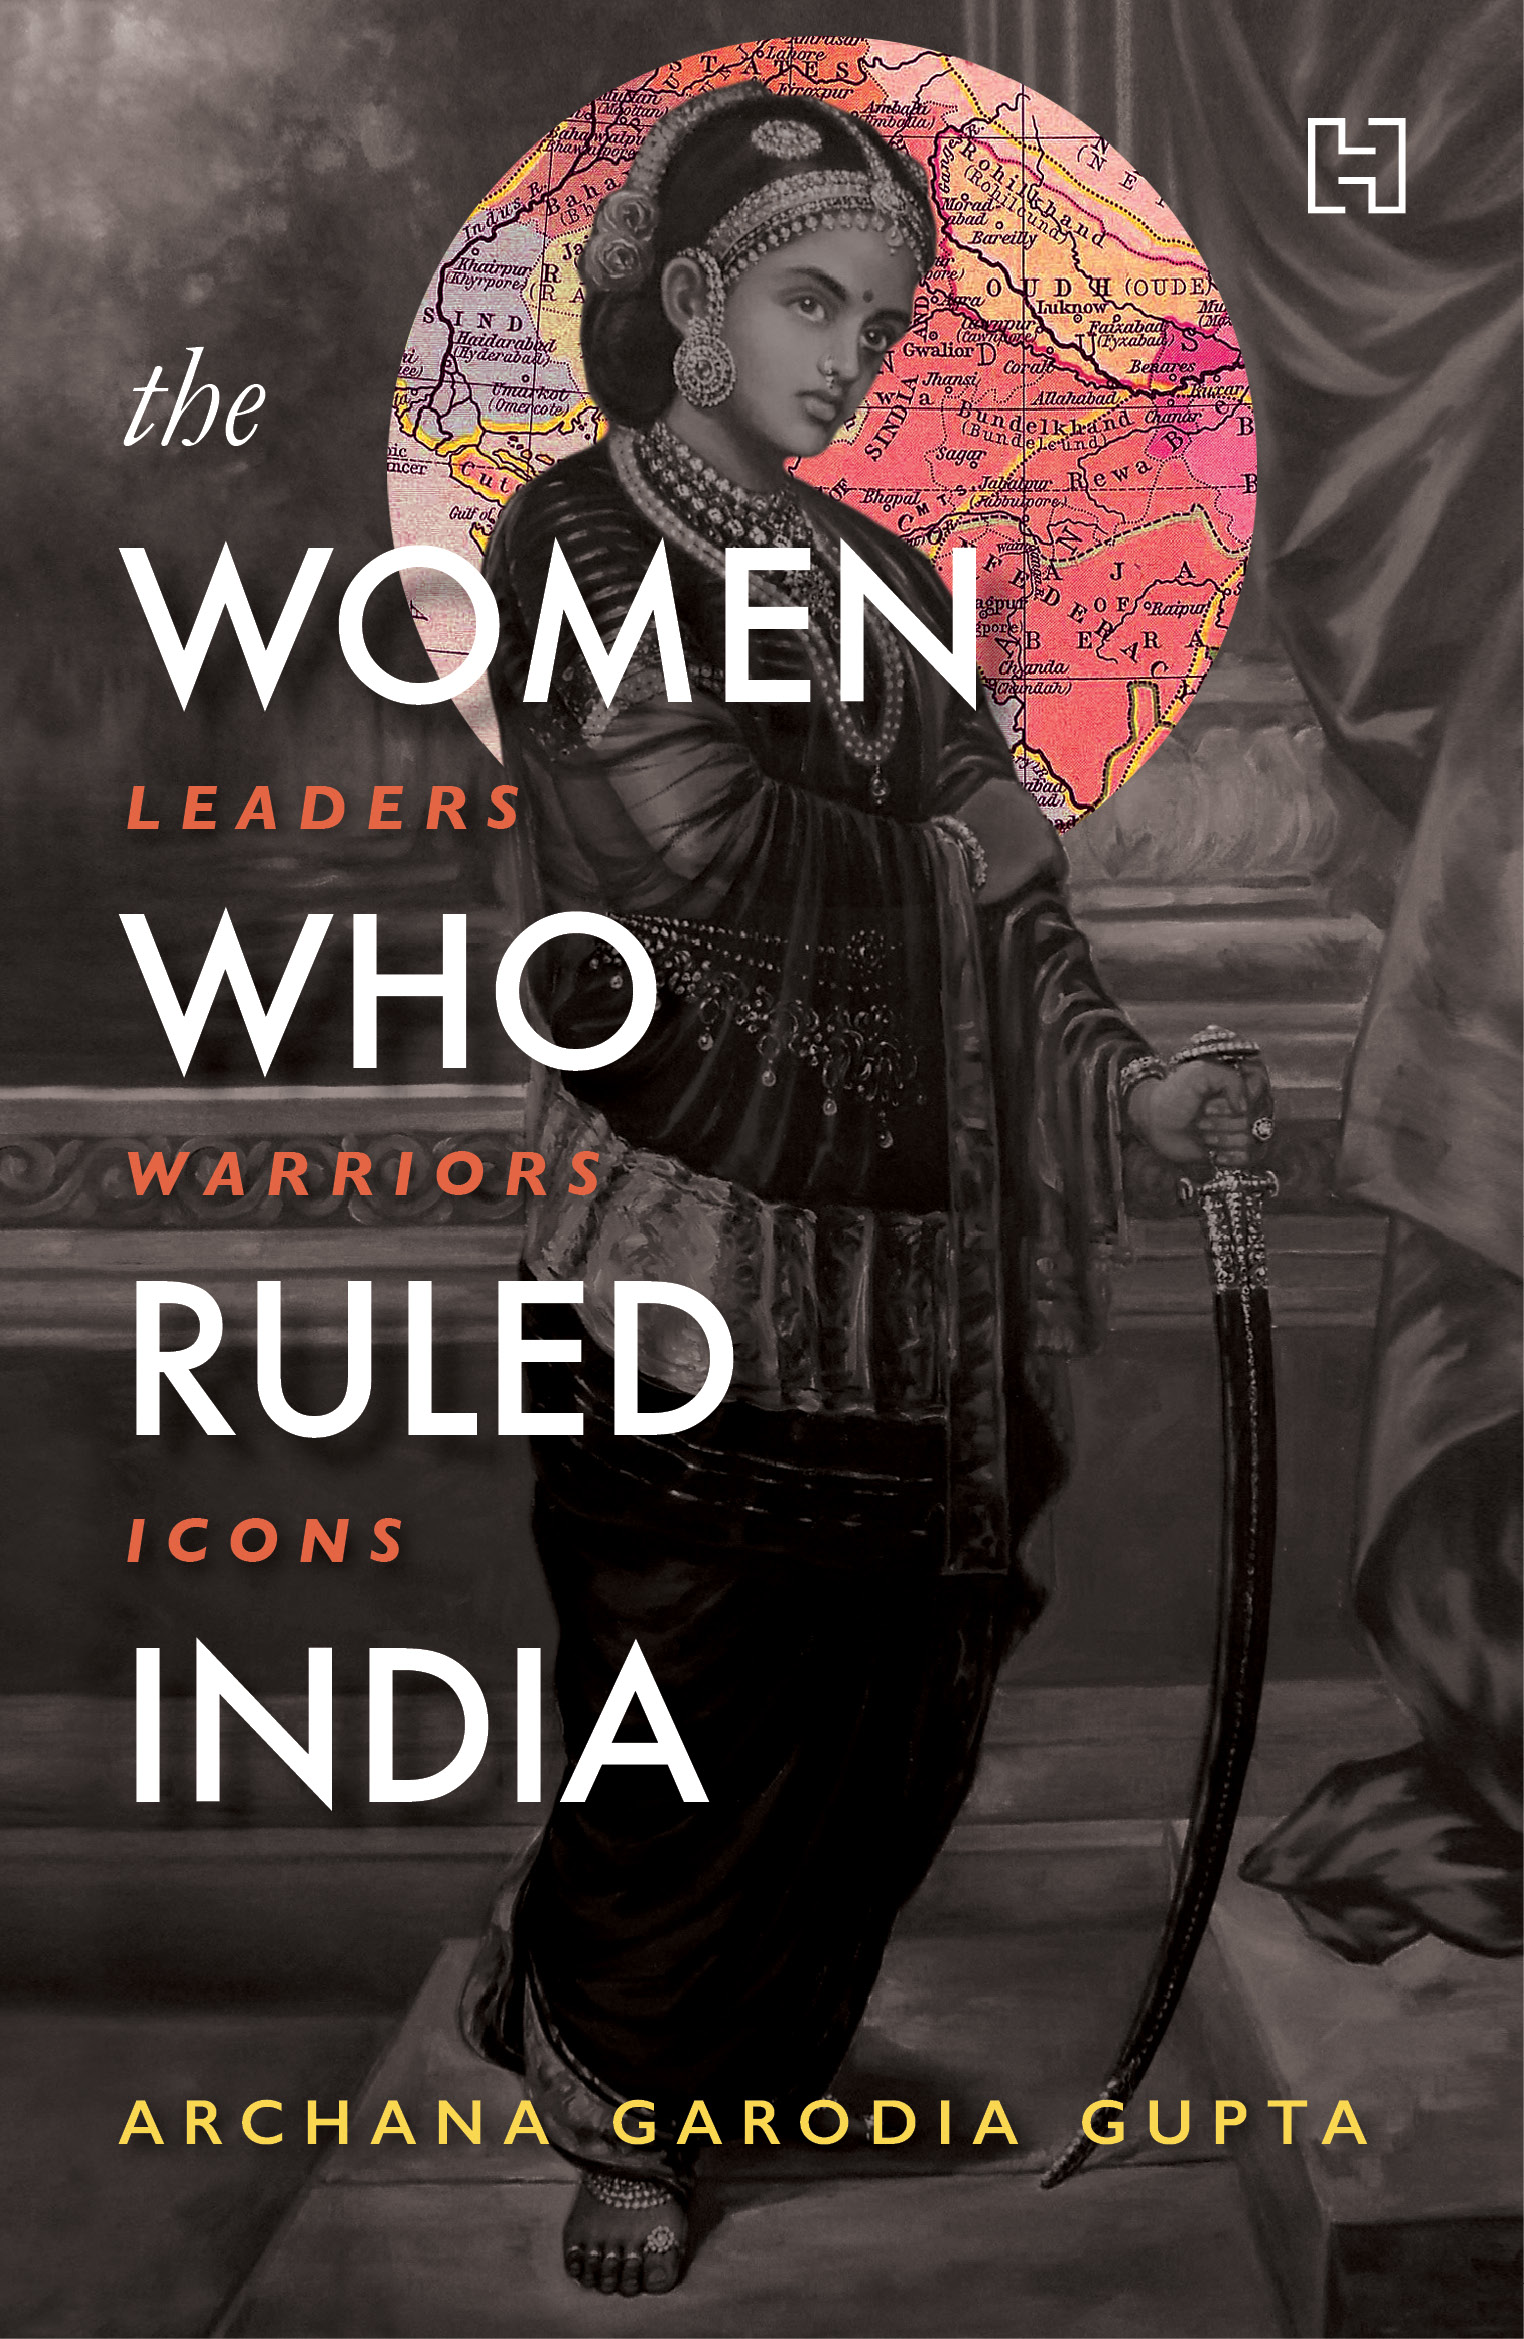 THE WOMEN WHO RULED INDIA: LEADERS. WARRIORS. ICONS. 